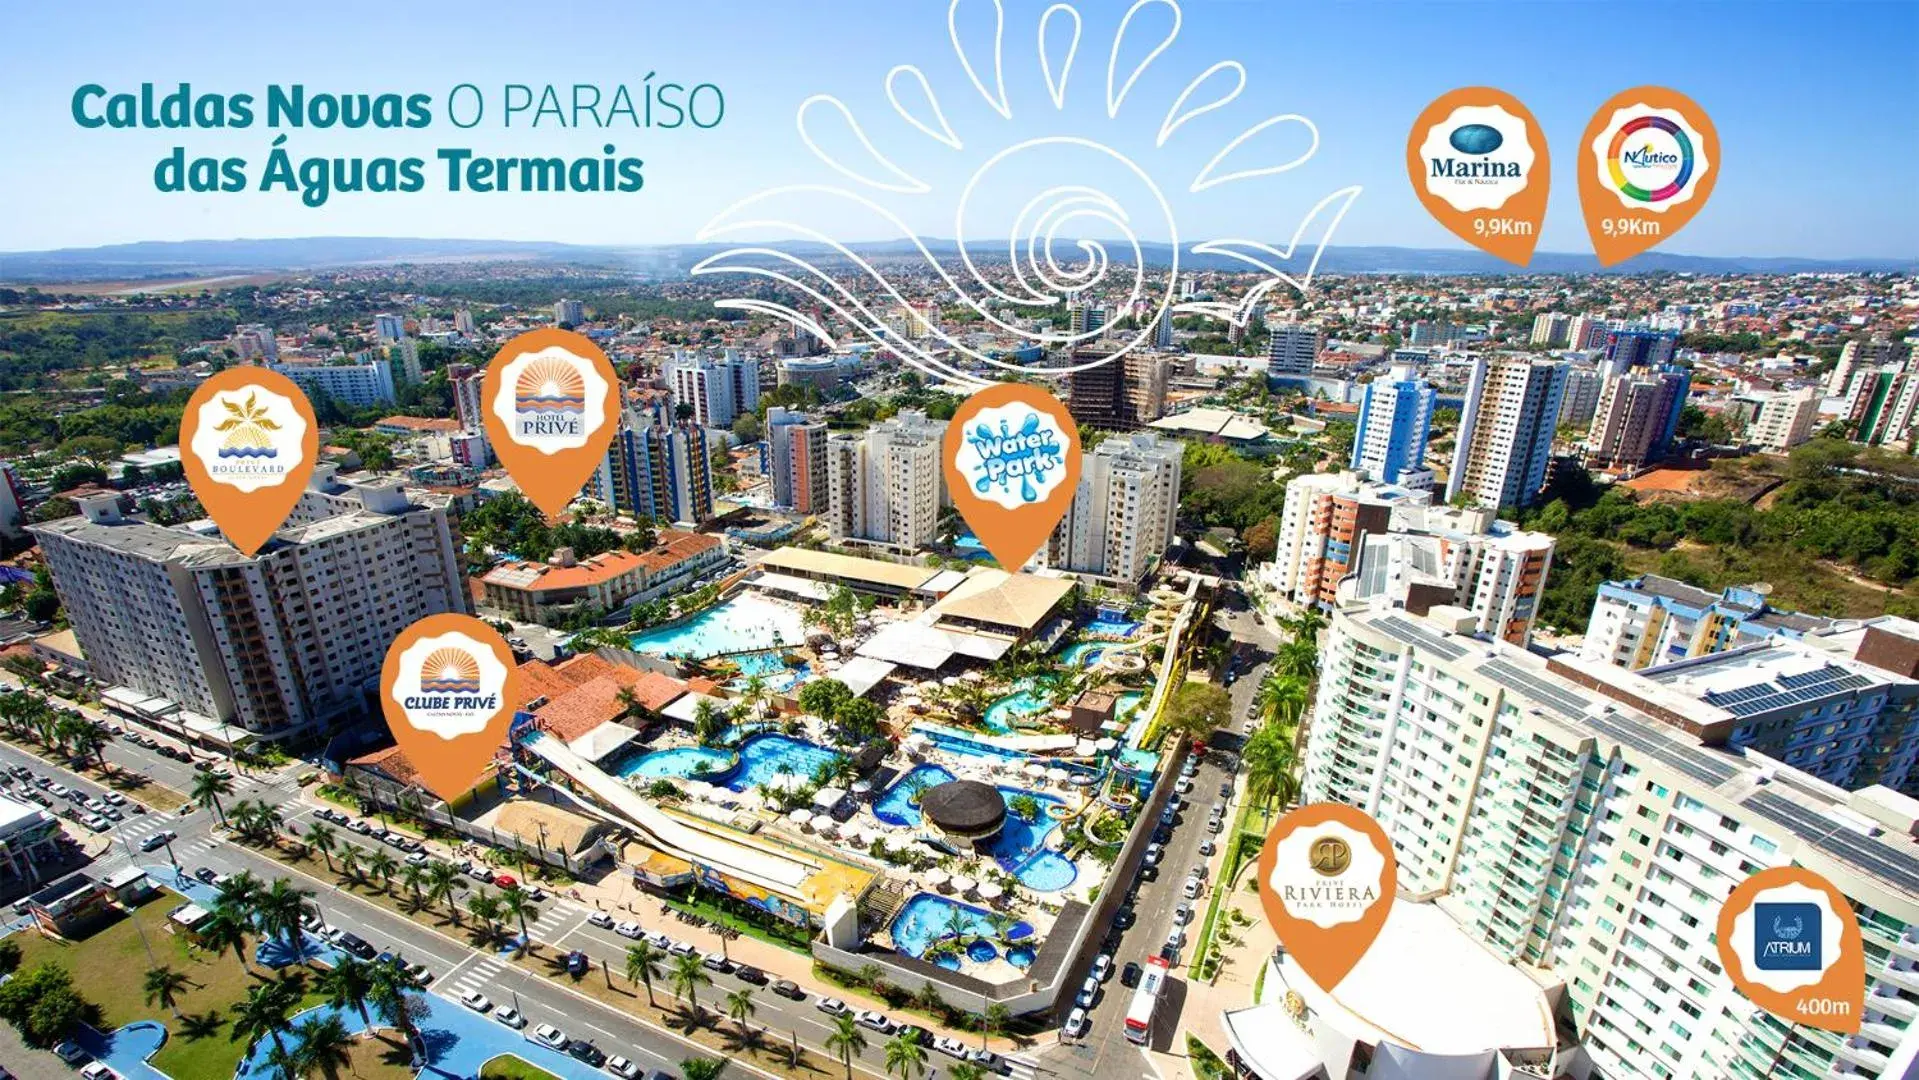 Off site, Bird's-eye View in Prive Thermas – OFICIAL